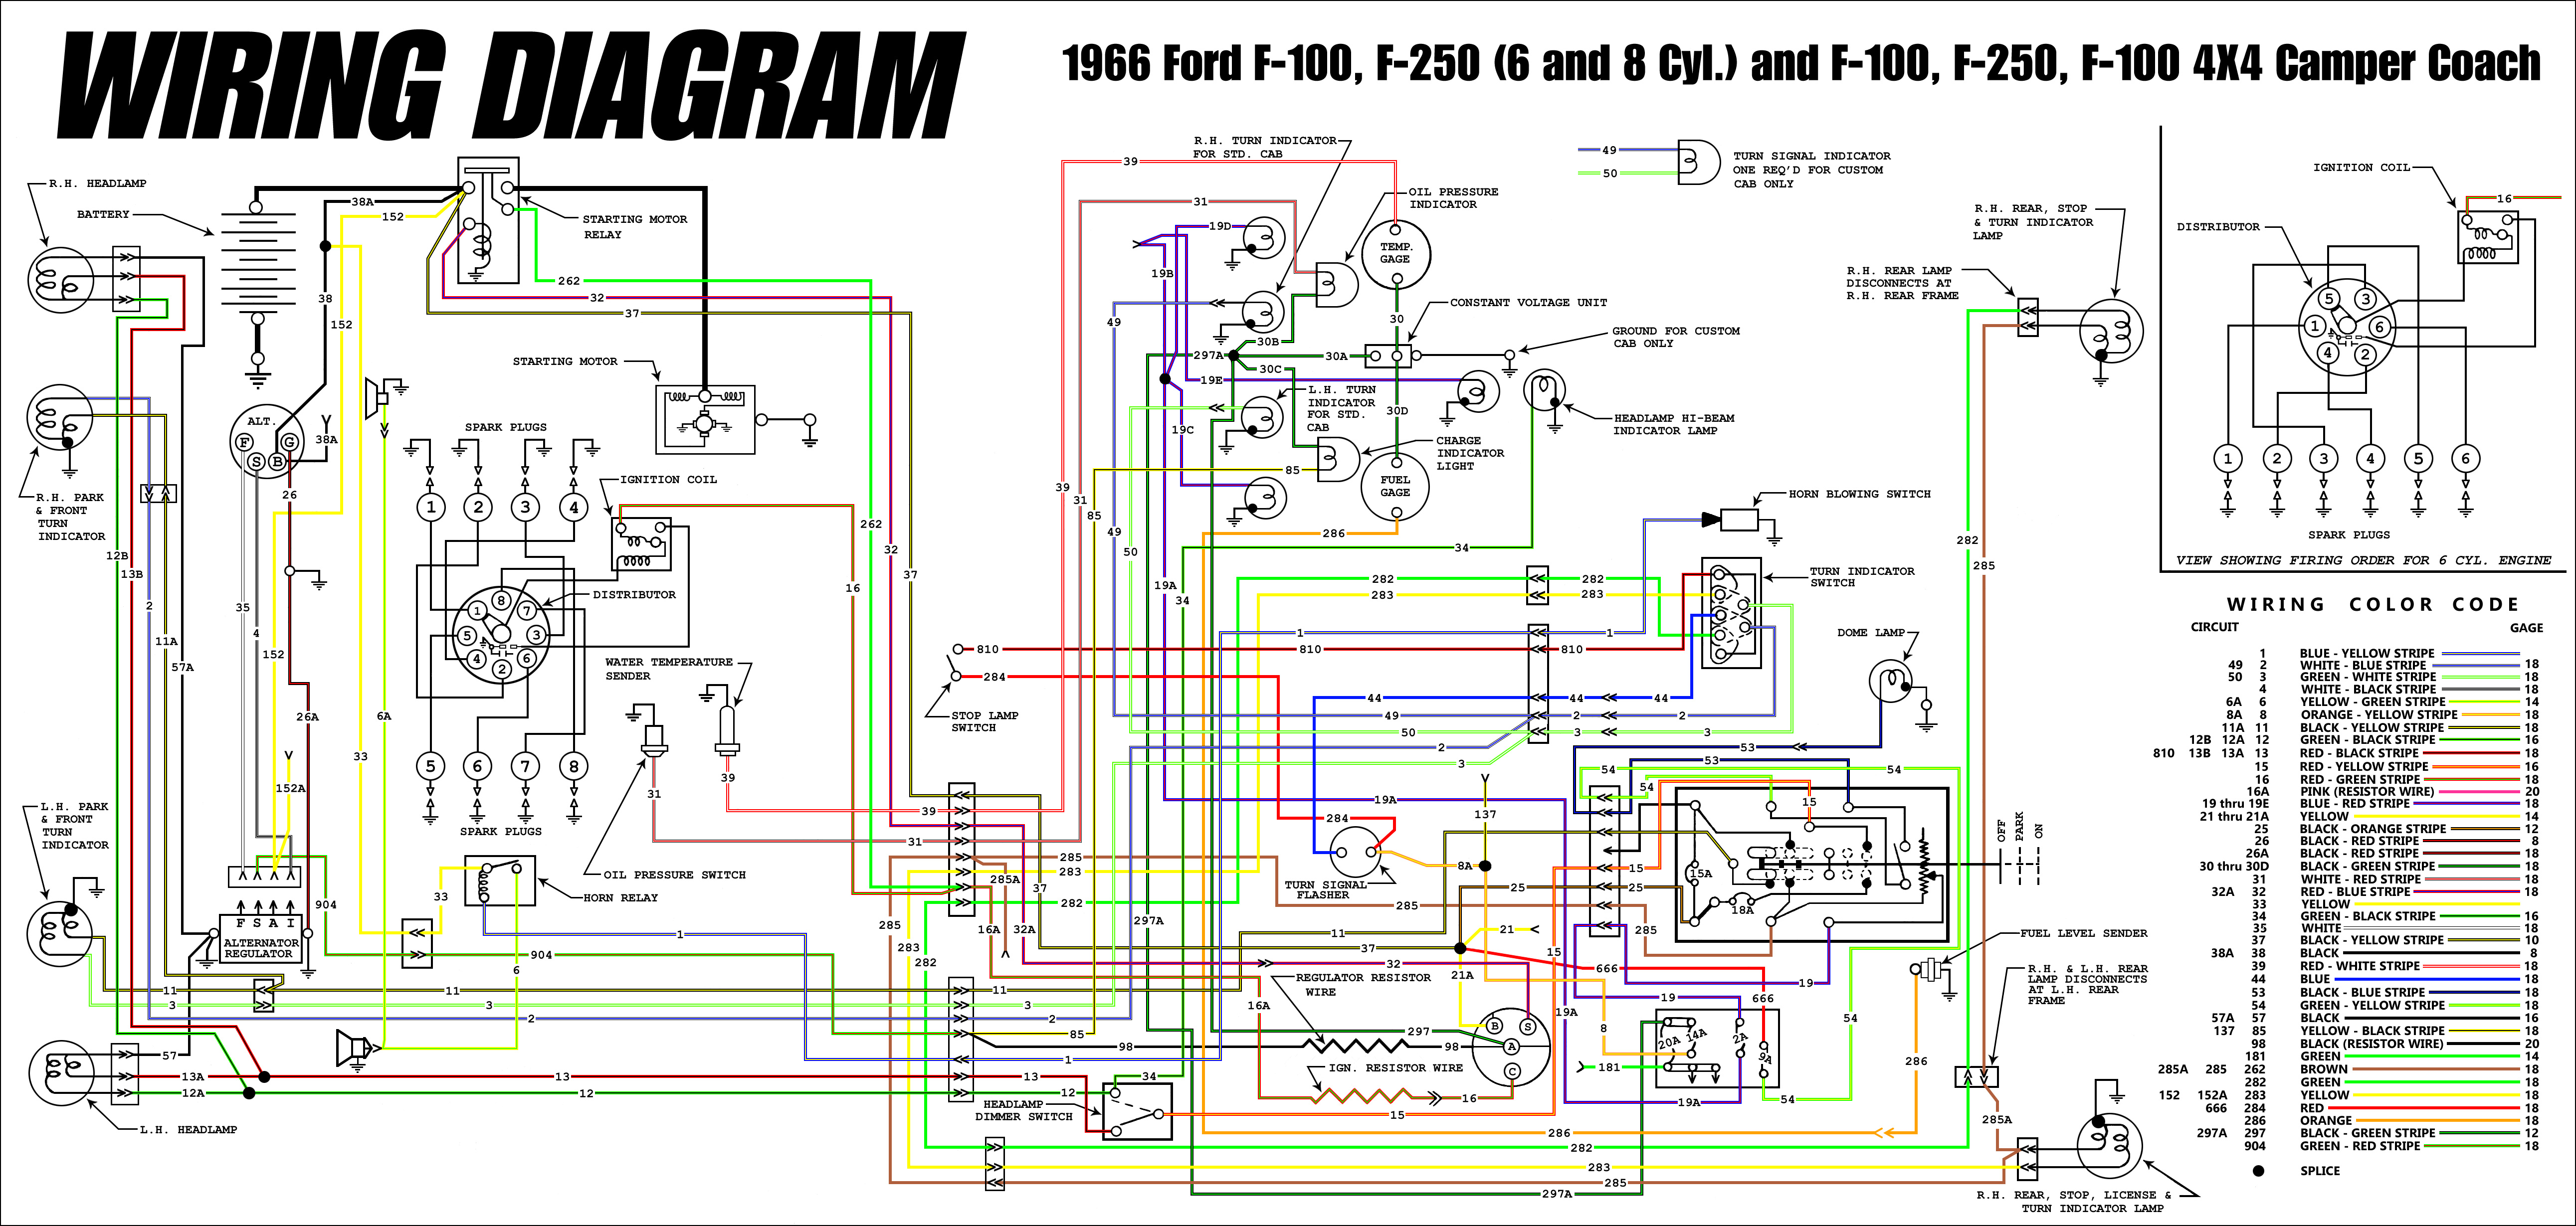 66 f100 cab light wiring - Ford Truck Enthusiasts Forums 1974 ford f 250 ignition switch wiring diagram 